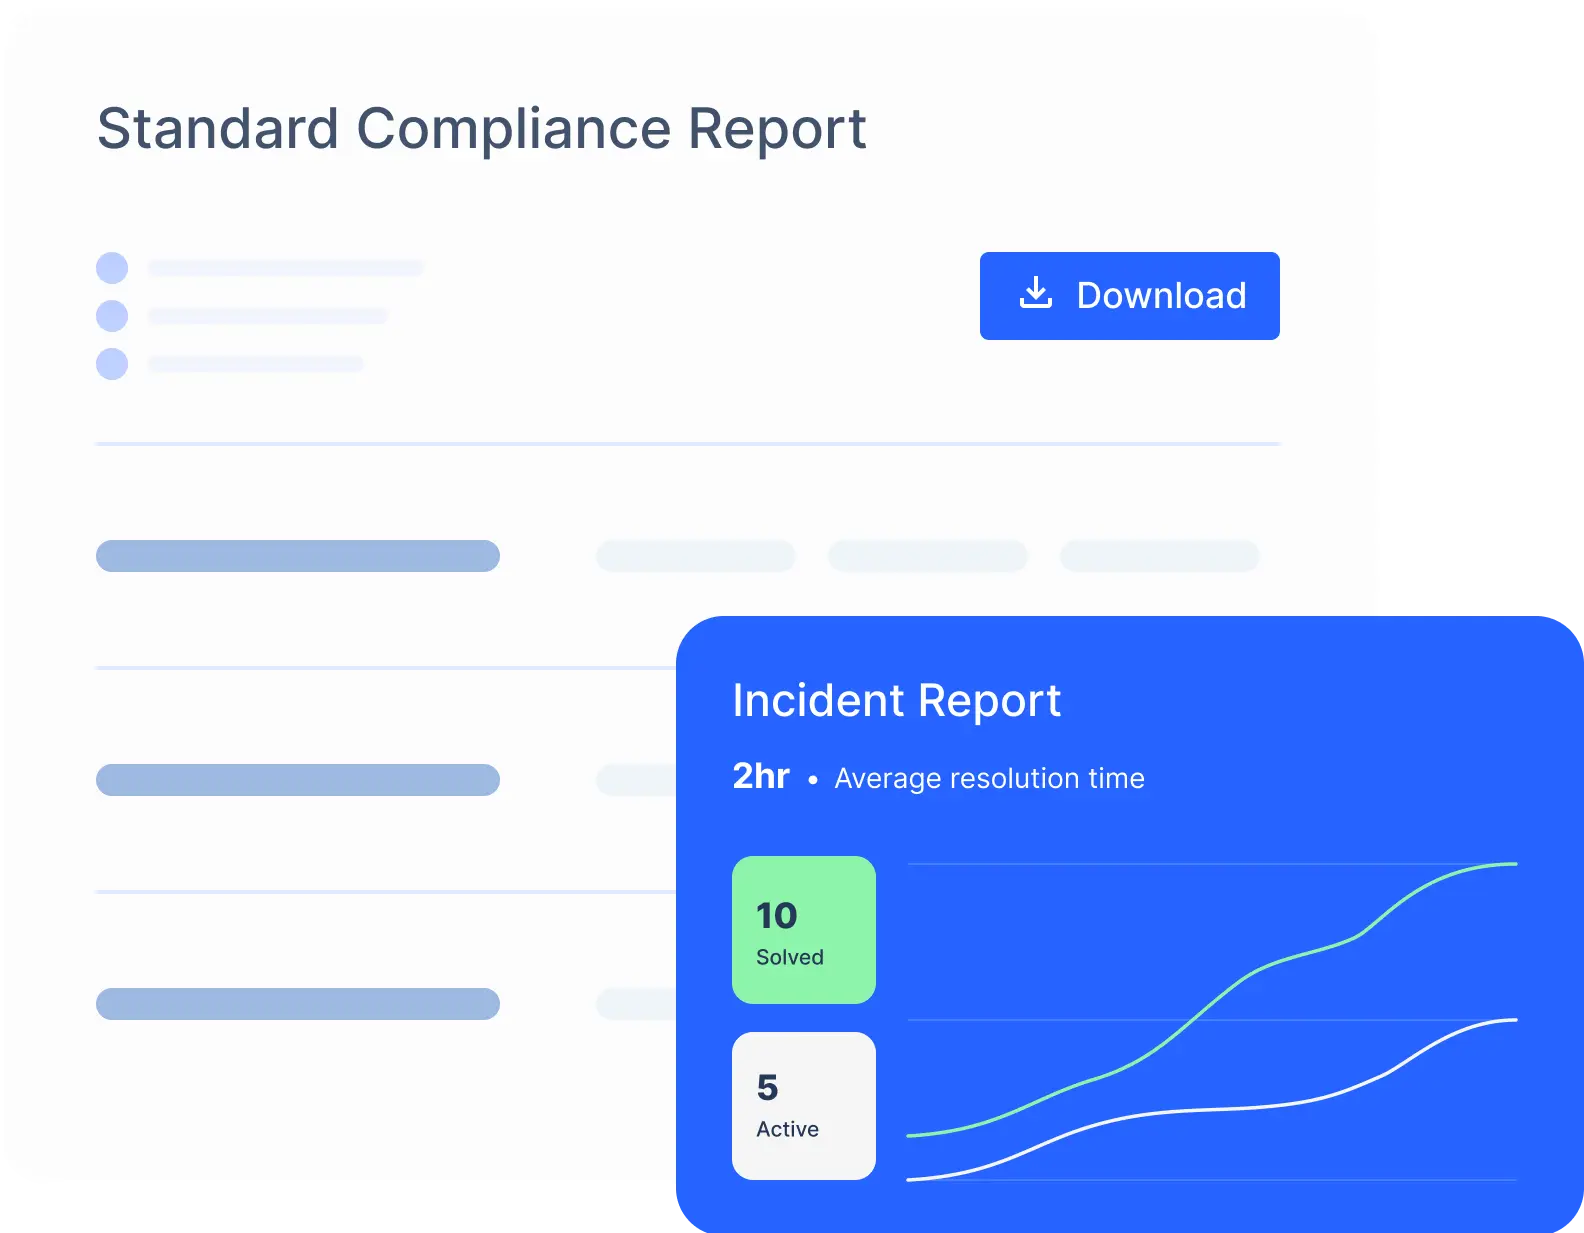 Ready-for-compliance report is always downloadable